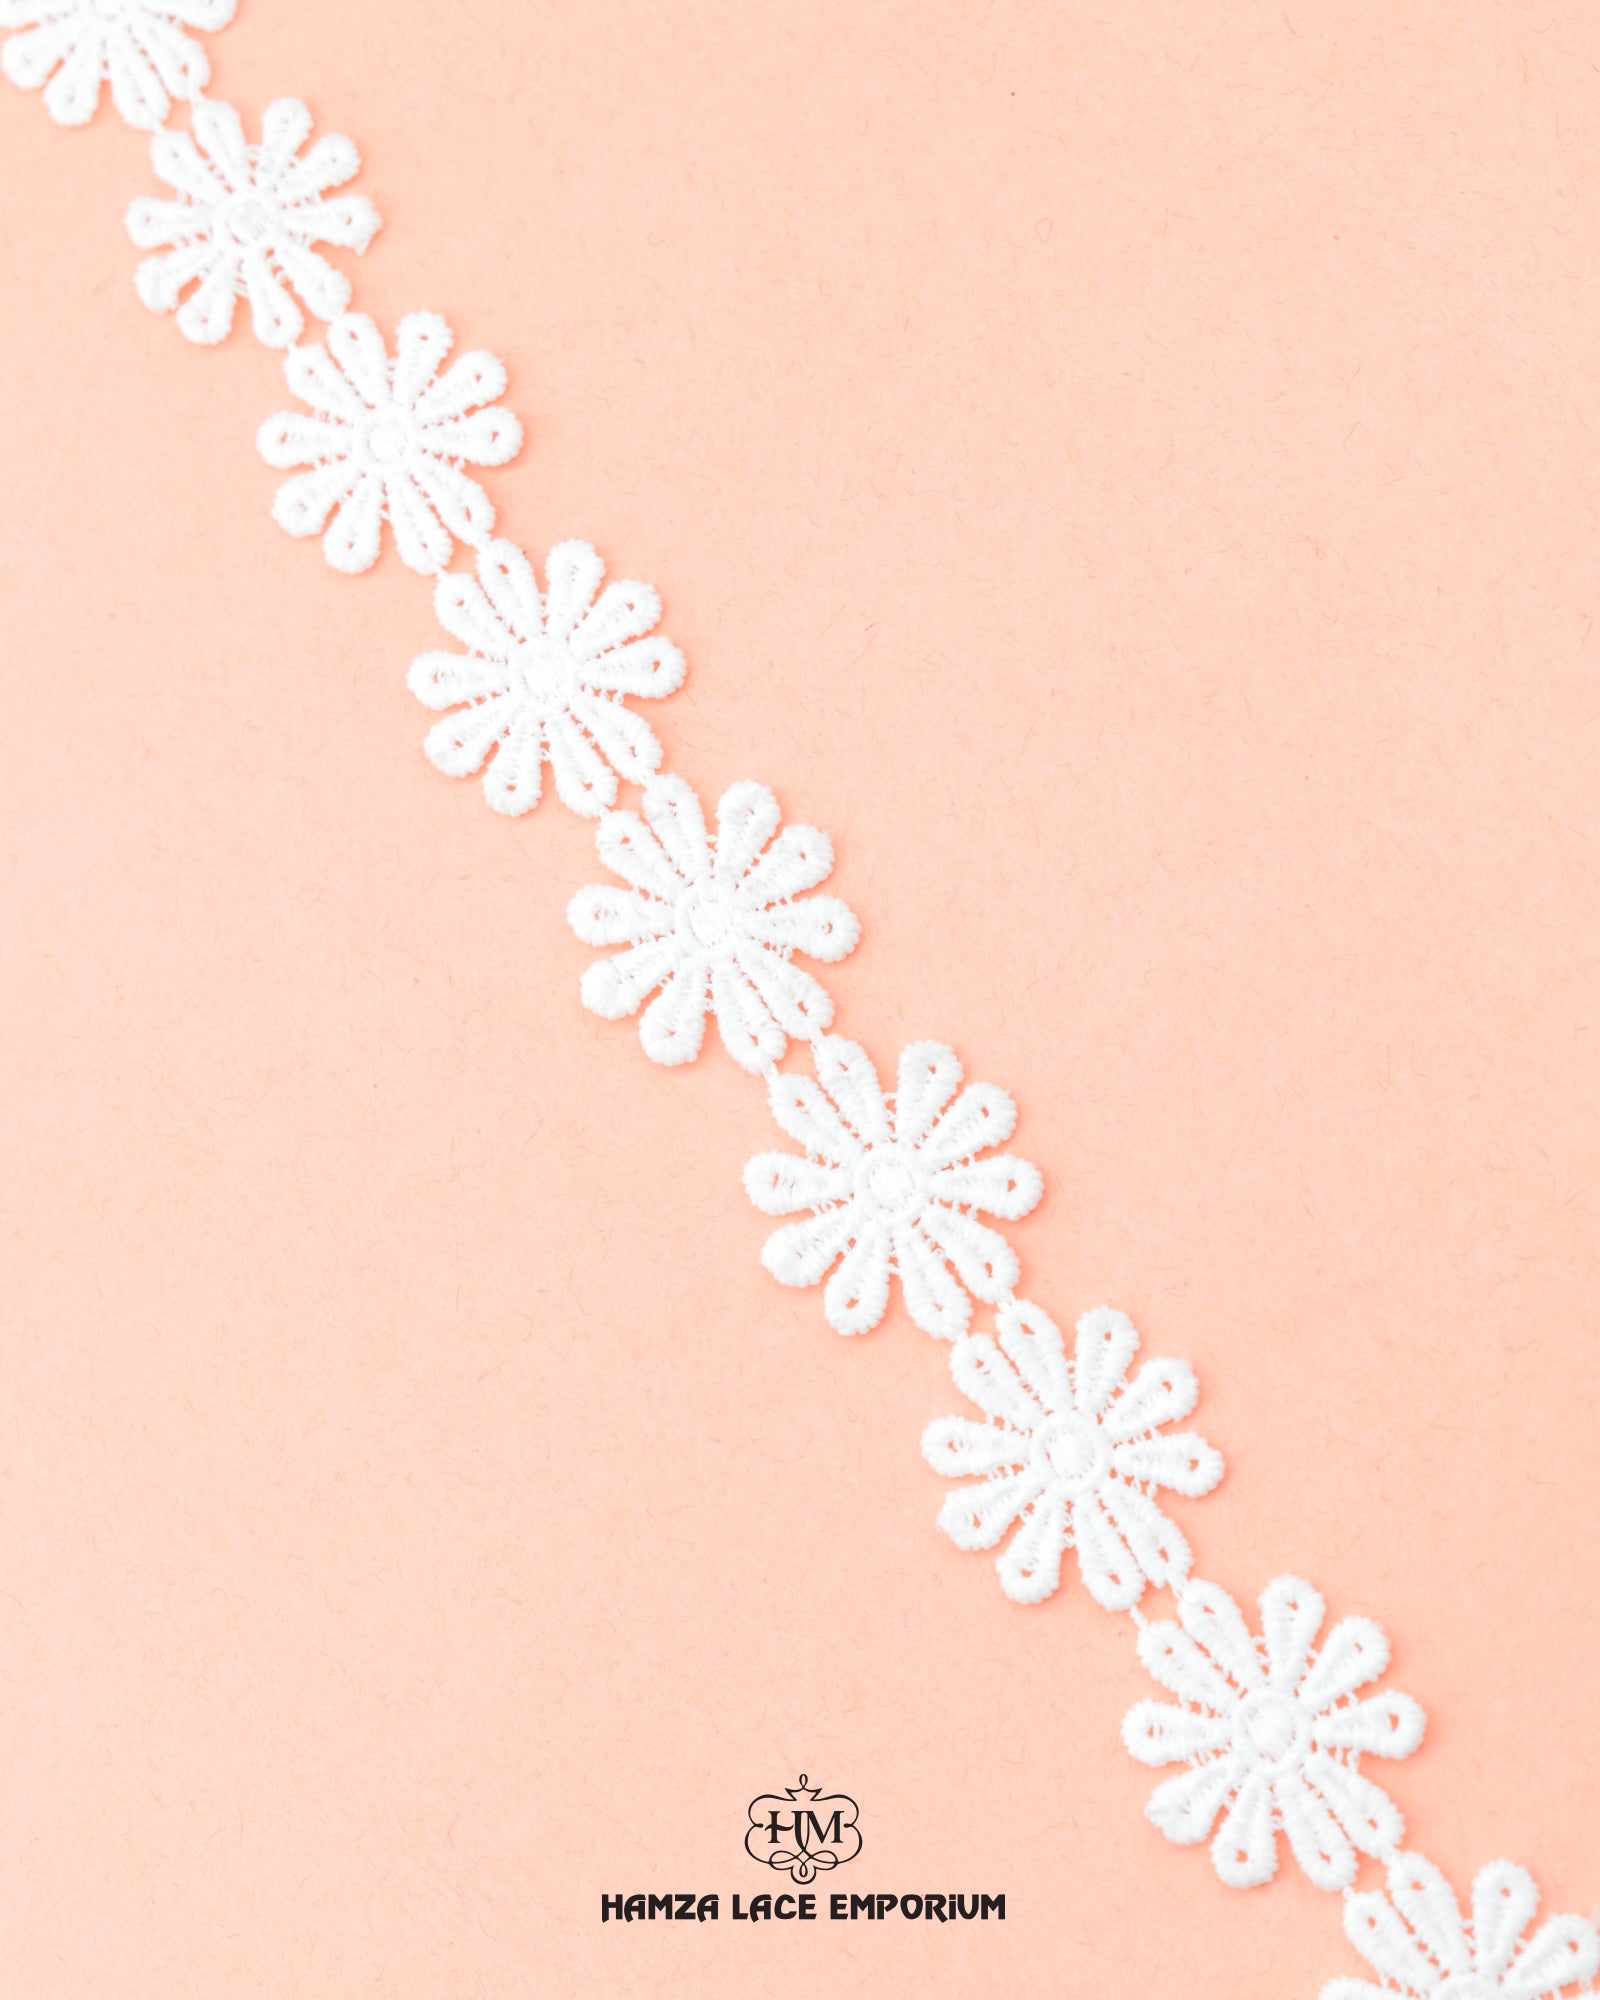 A white piece of 'Center Flower Lace 18002' and the 'Hamza Lace' and the brand logo at the bottom